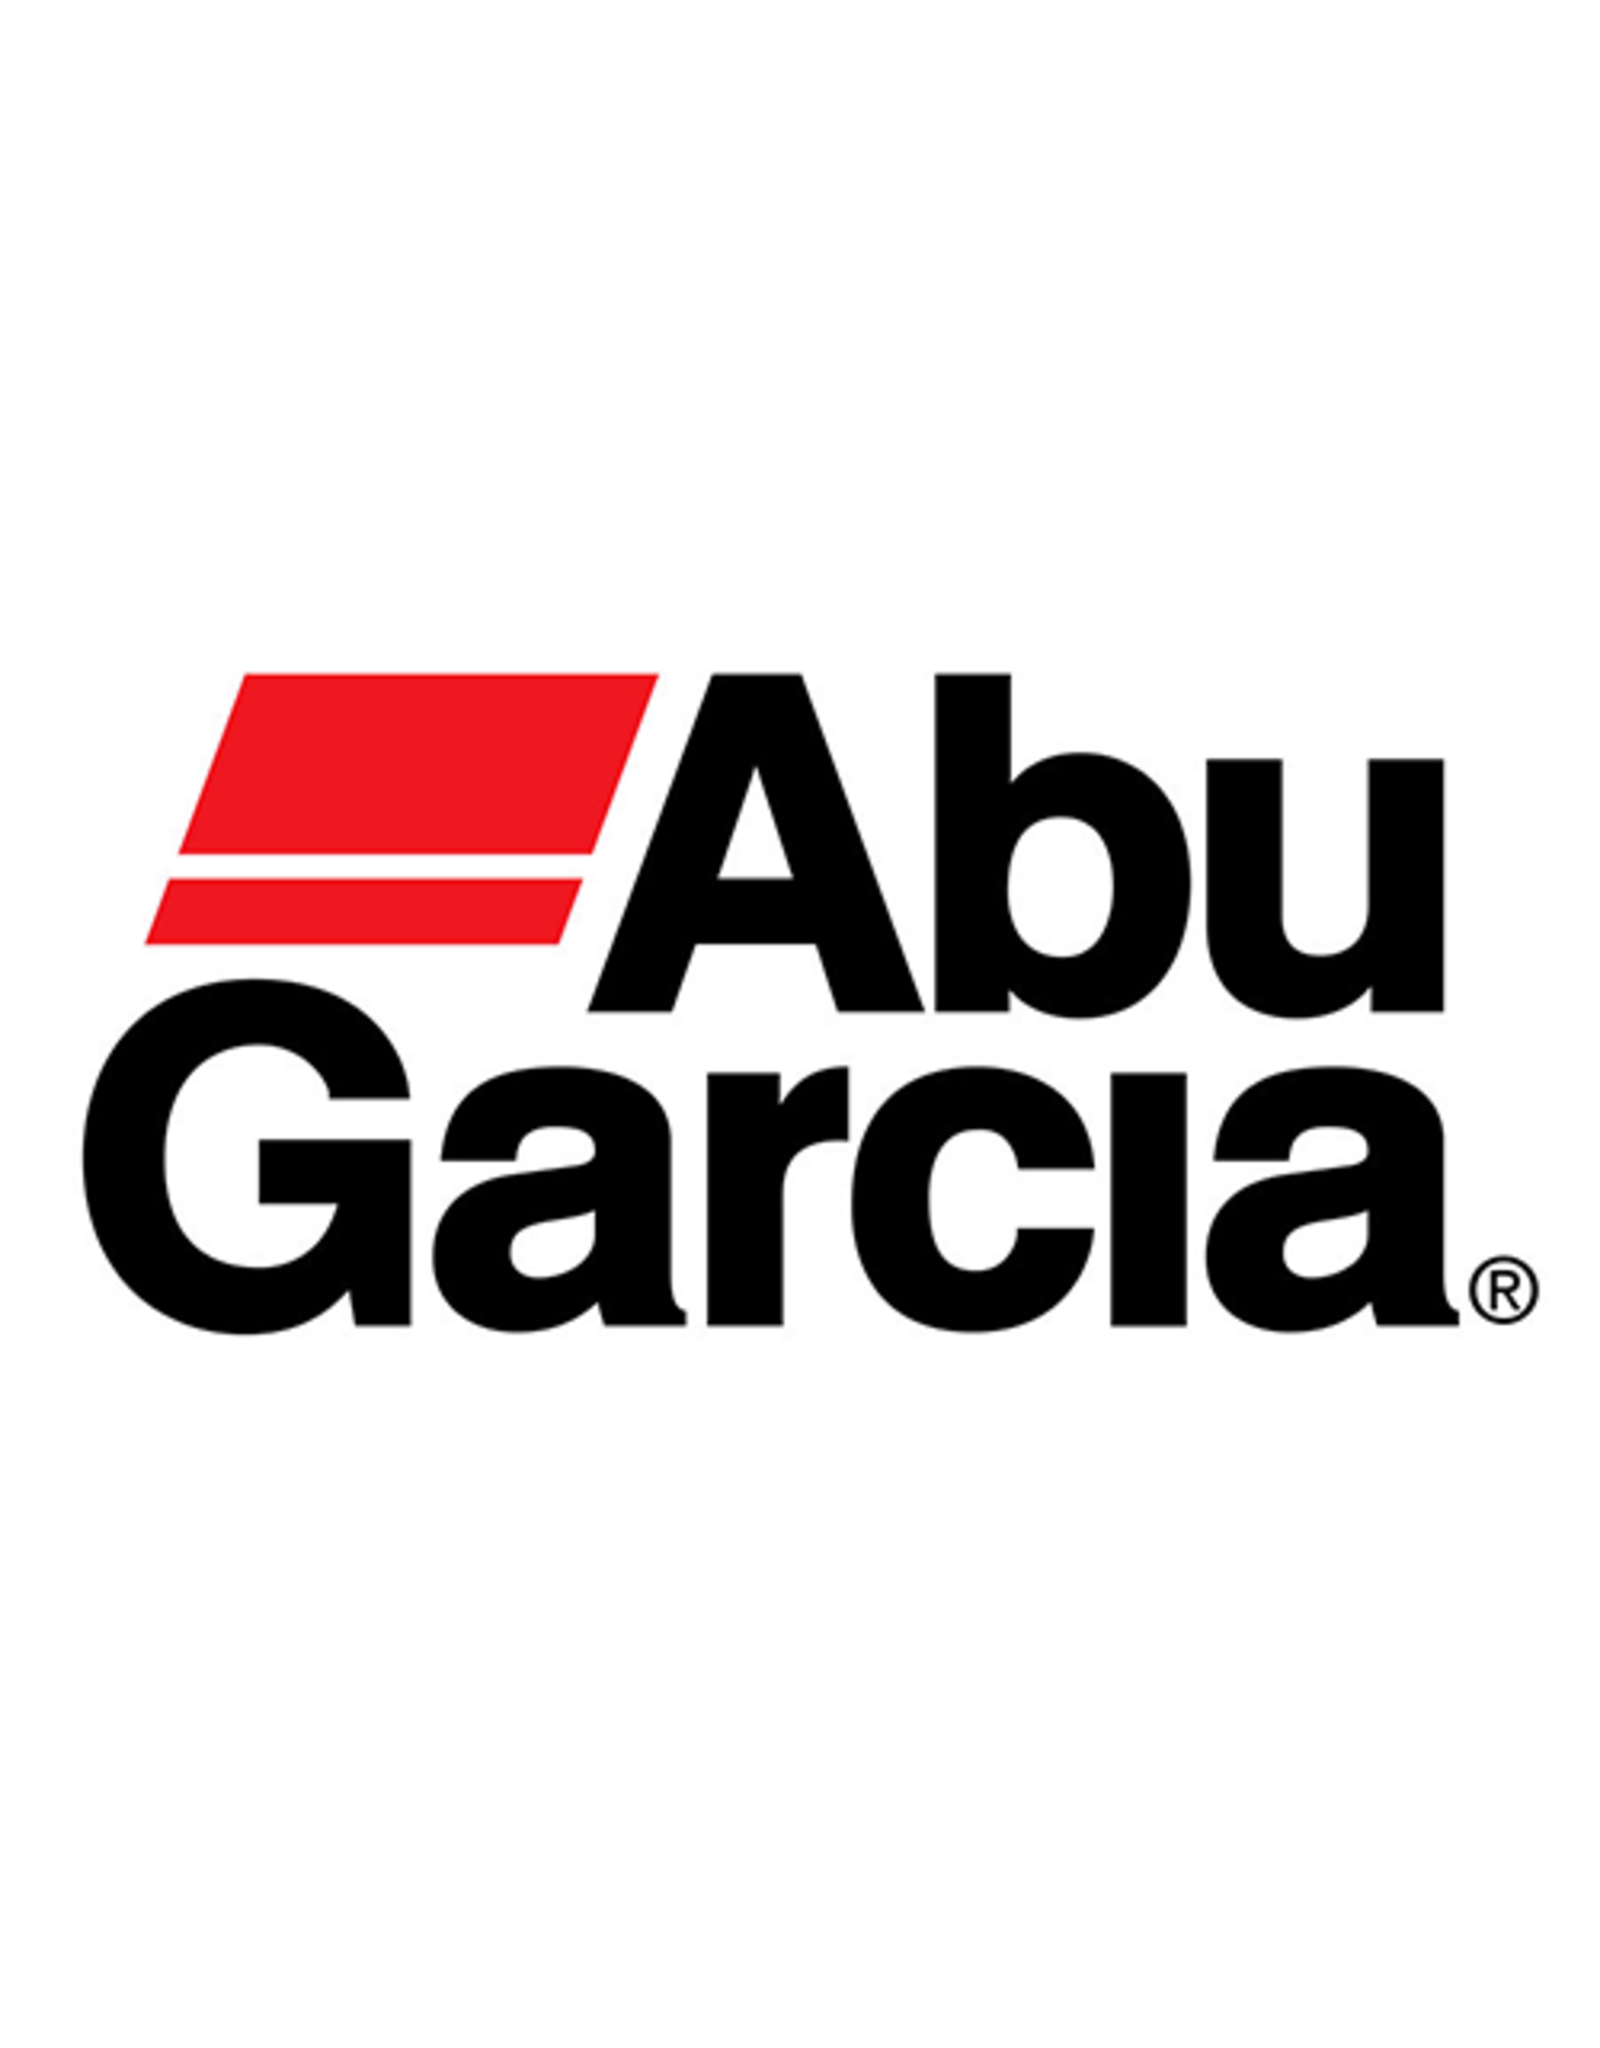 Abu Garcia 1380697  FRONT COVER